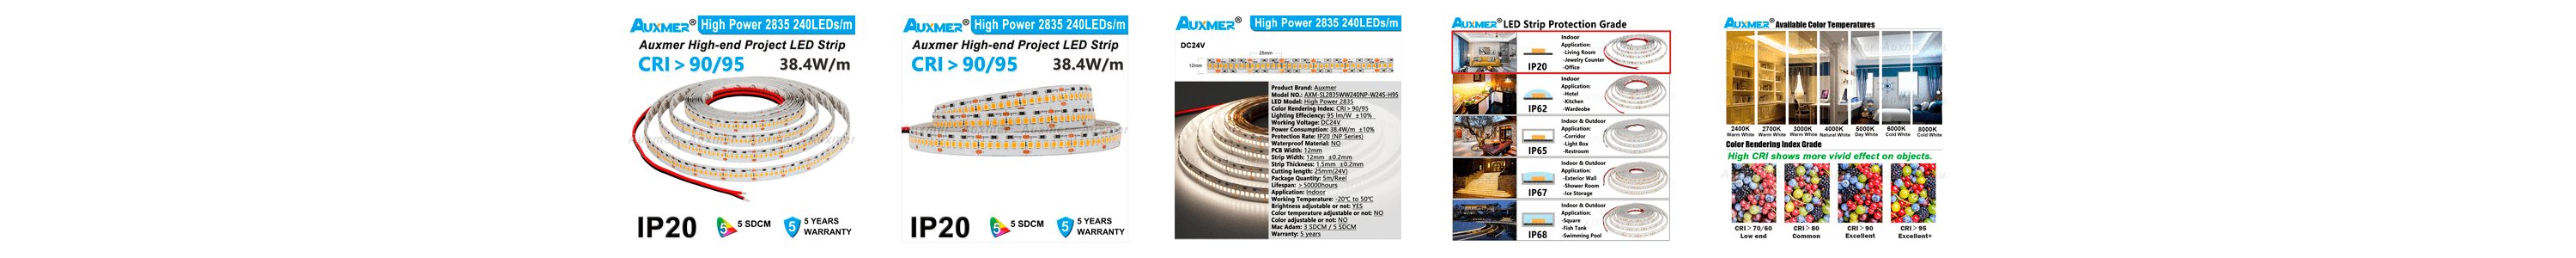 High Power 2835 240LEDs/m LED Strip,CRI95 CRI90,PCB Wide 12mm,IP20 DC24V,38.4W/m 1200LED/Reel,Non-waterproof for Conference hall